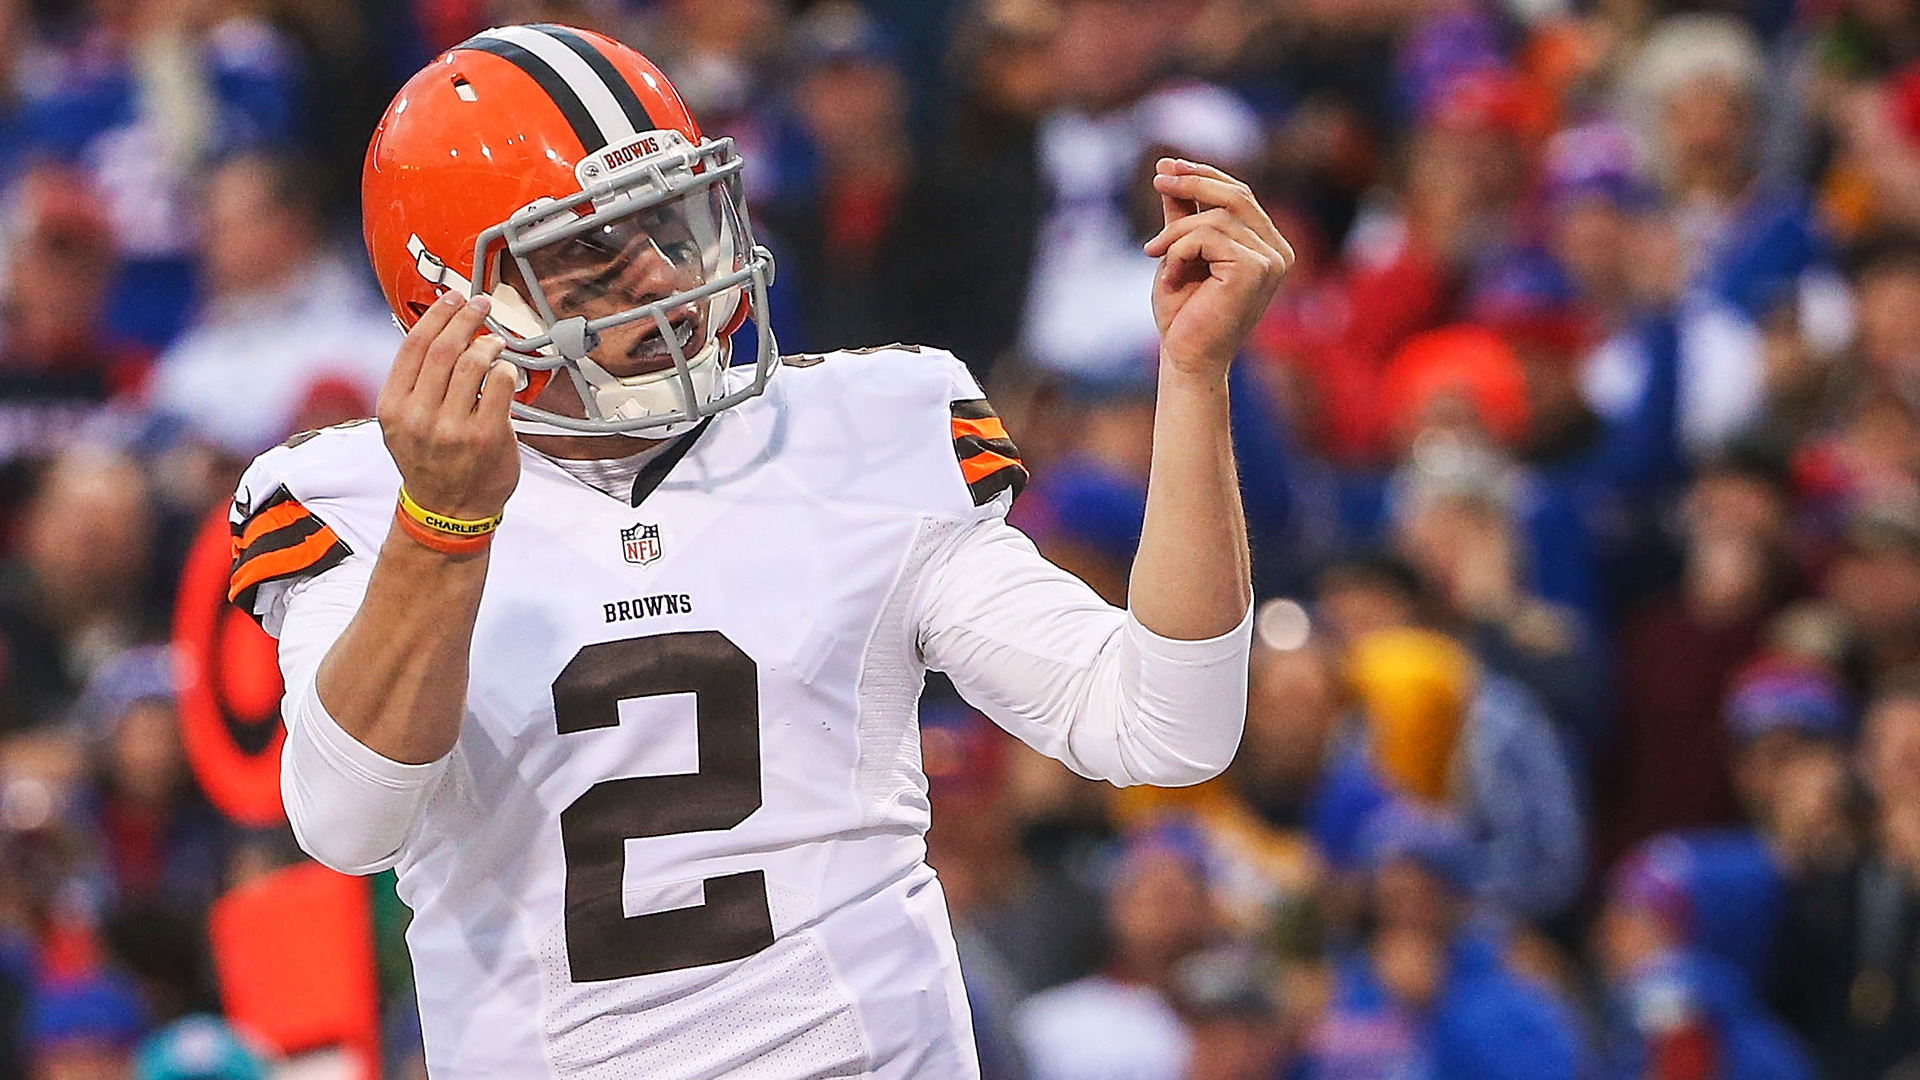 Johnny Manziel S Start Forces Many To Watch Browns Game Other